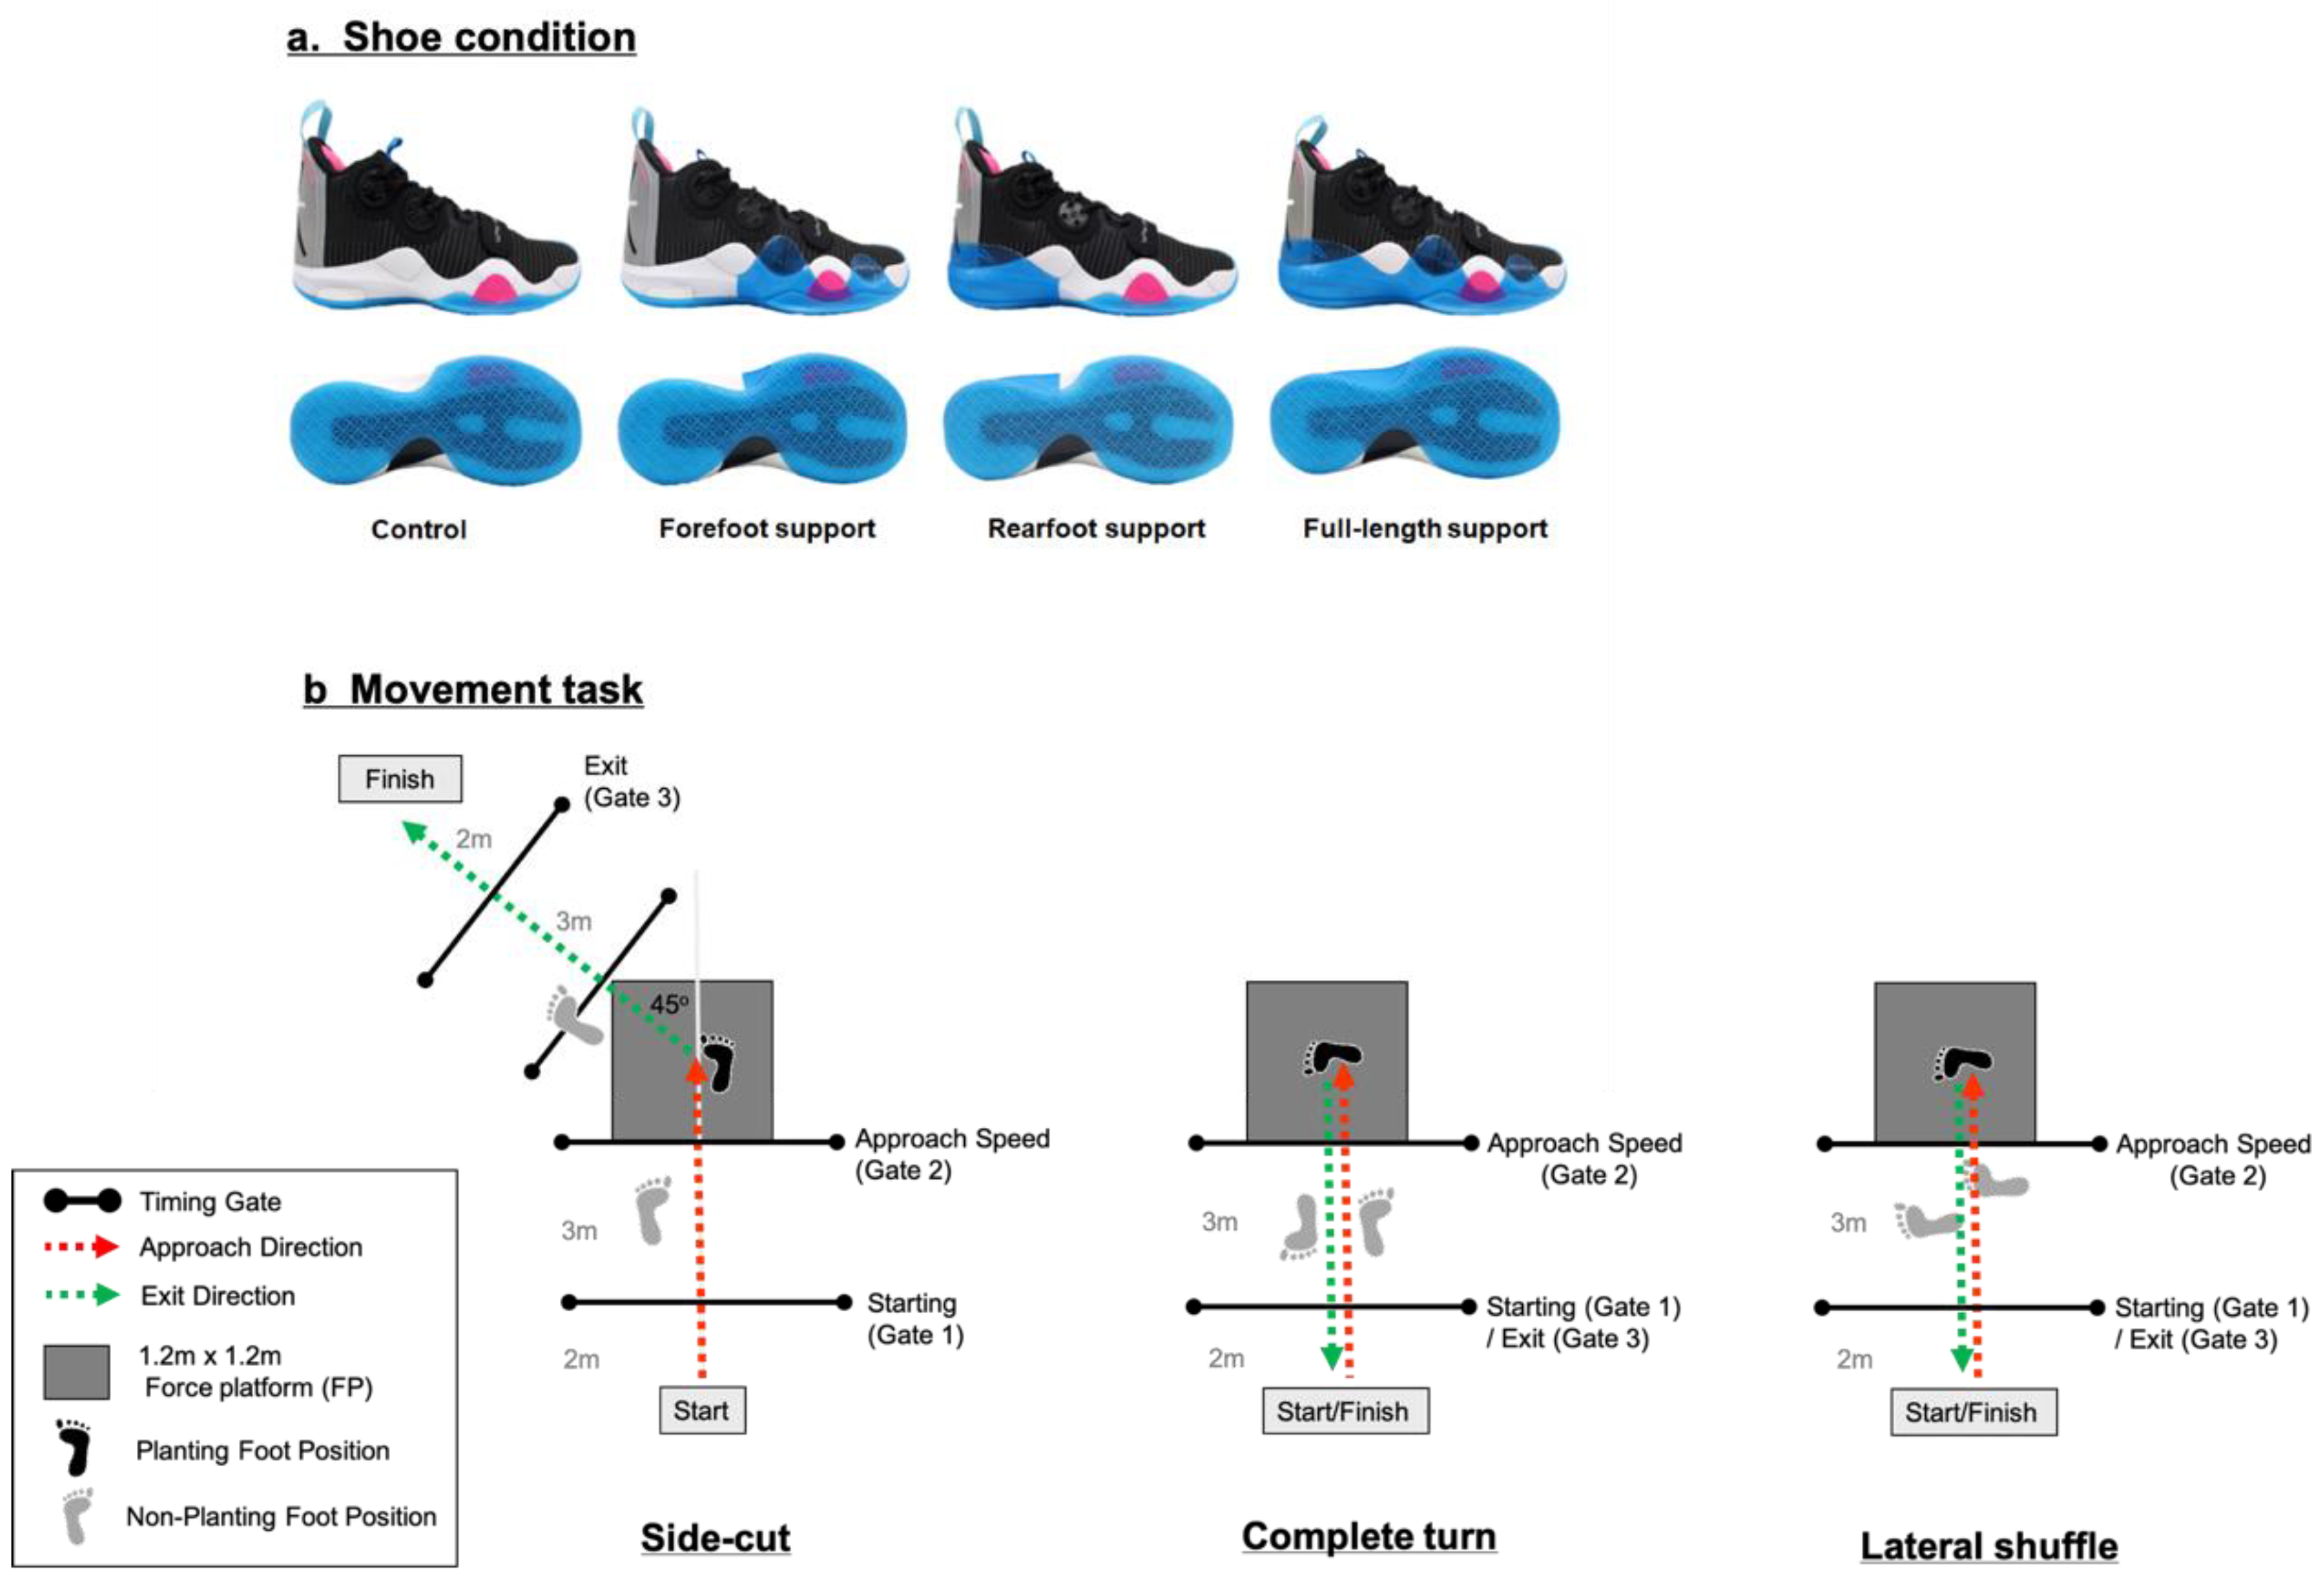 Biology Free Full-Text Does the Location of Shoe Upper Support on Basketball Shoes Influence Ground Reaction Force and Ankle Mechanics during Cutting Maneuvers?